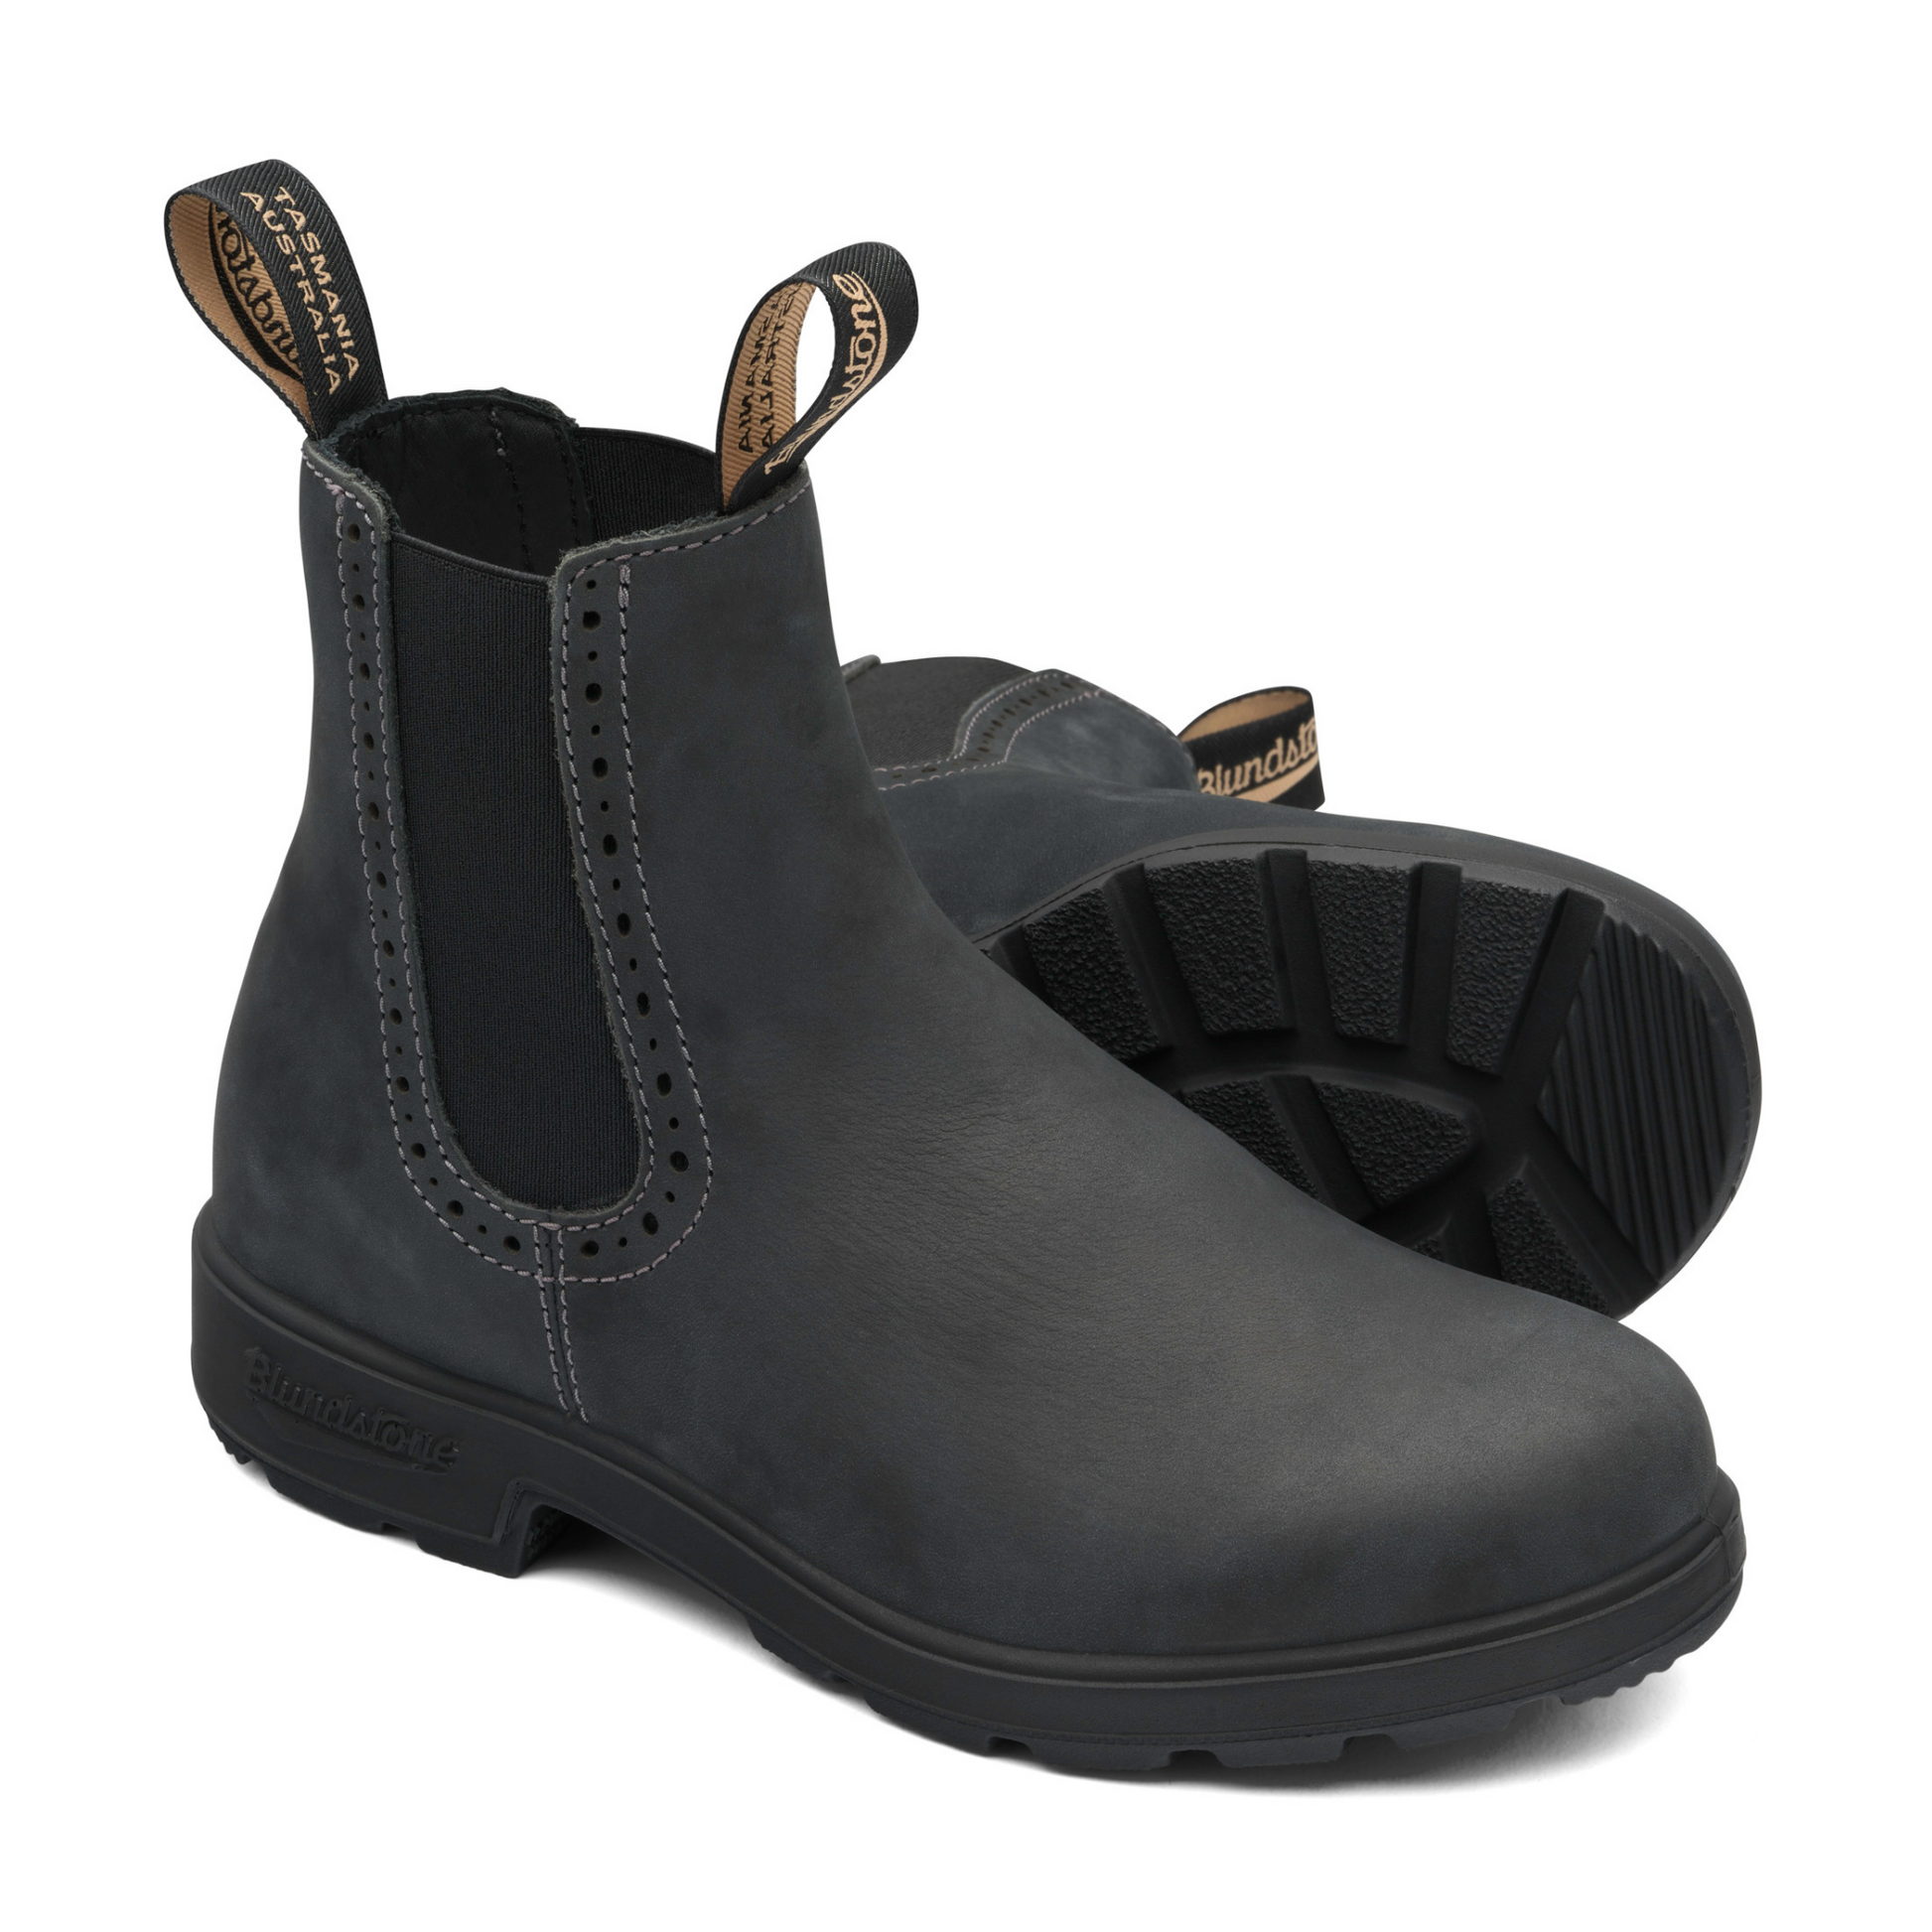 A pair of rustic black leather boots with black soles. Feminine broguing along the outer and inner ankle.